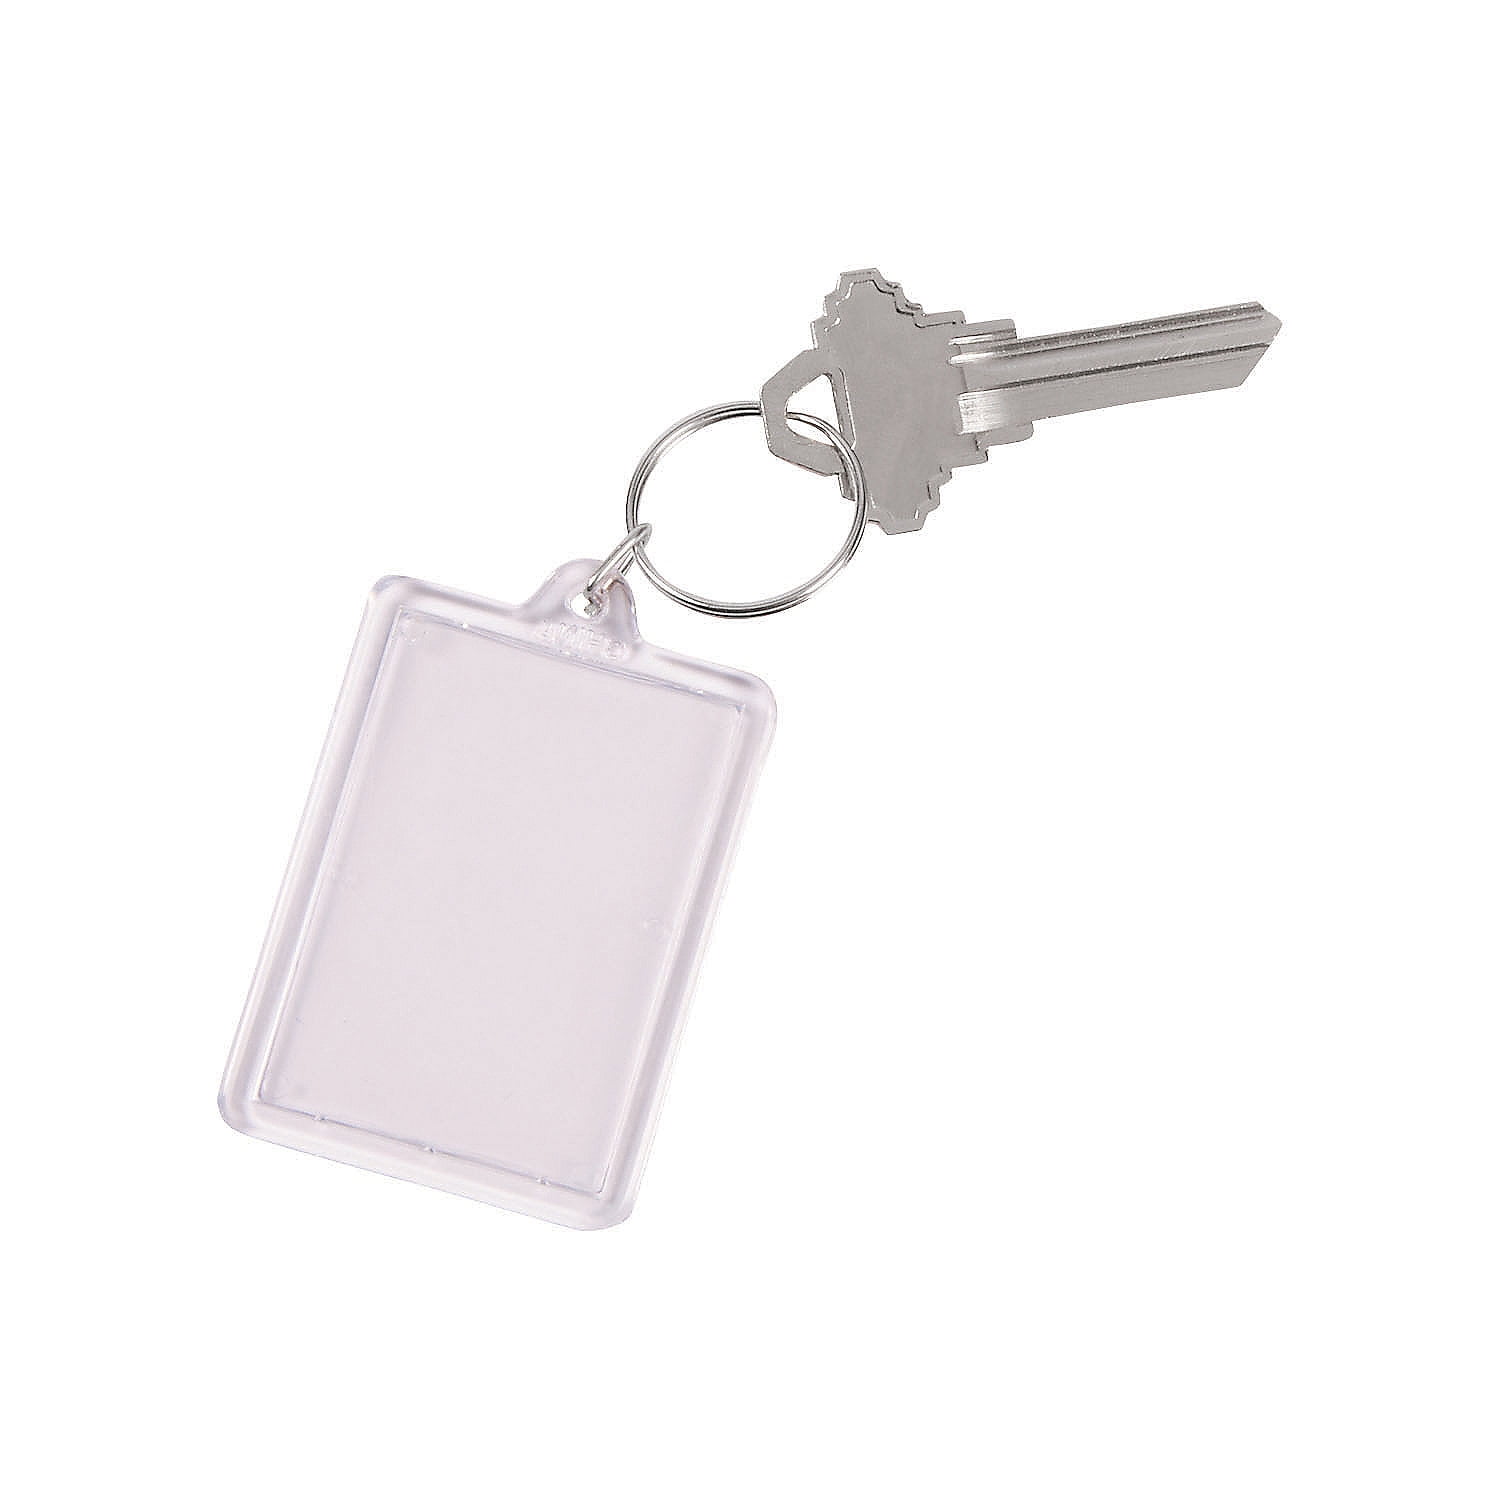 ***5 PCS*** Remove INSERT BEFORE FLIGHT Key Chain Keychain Key ring double sided 